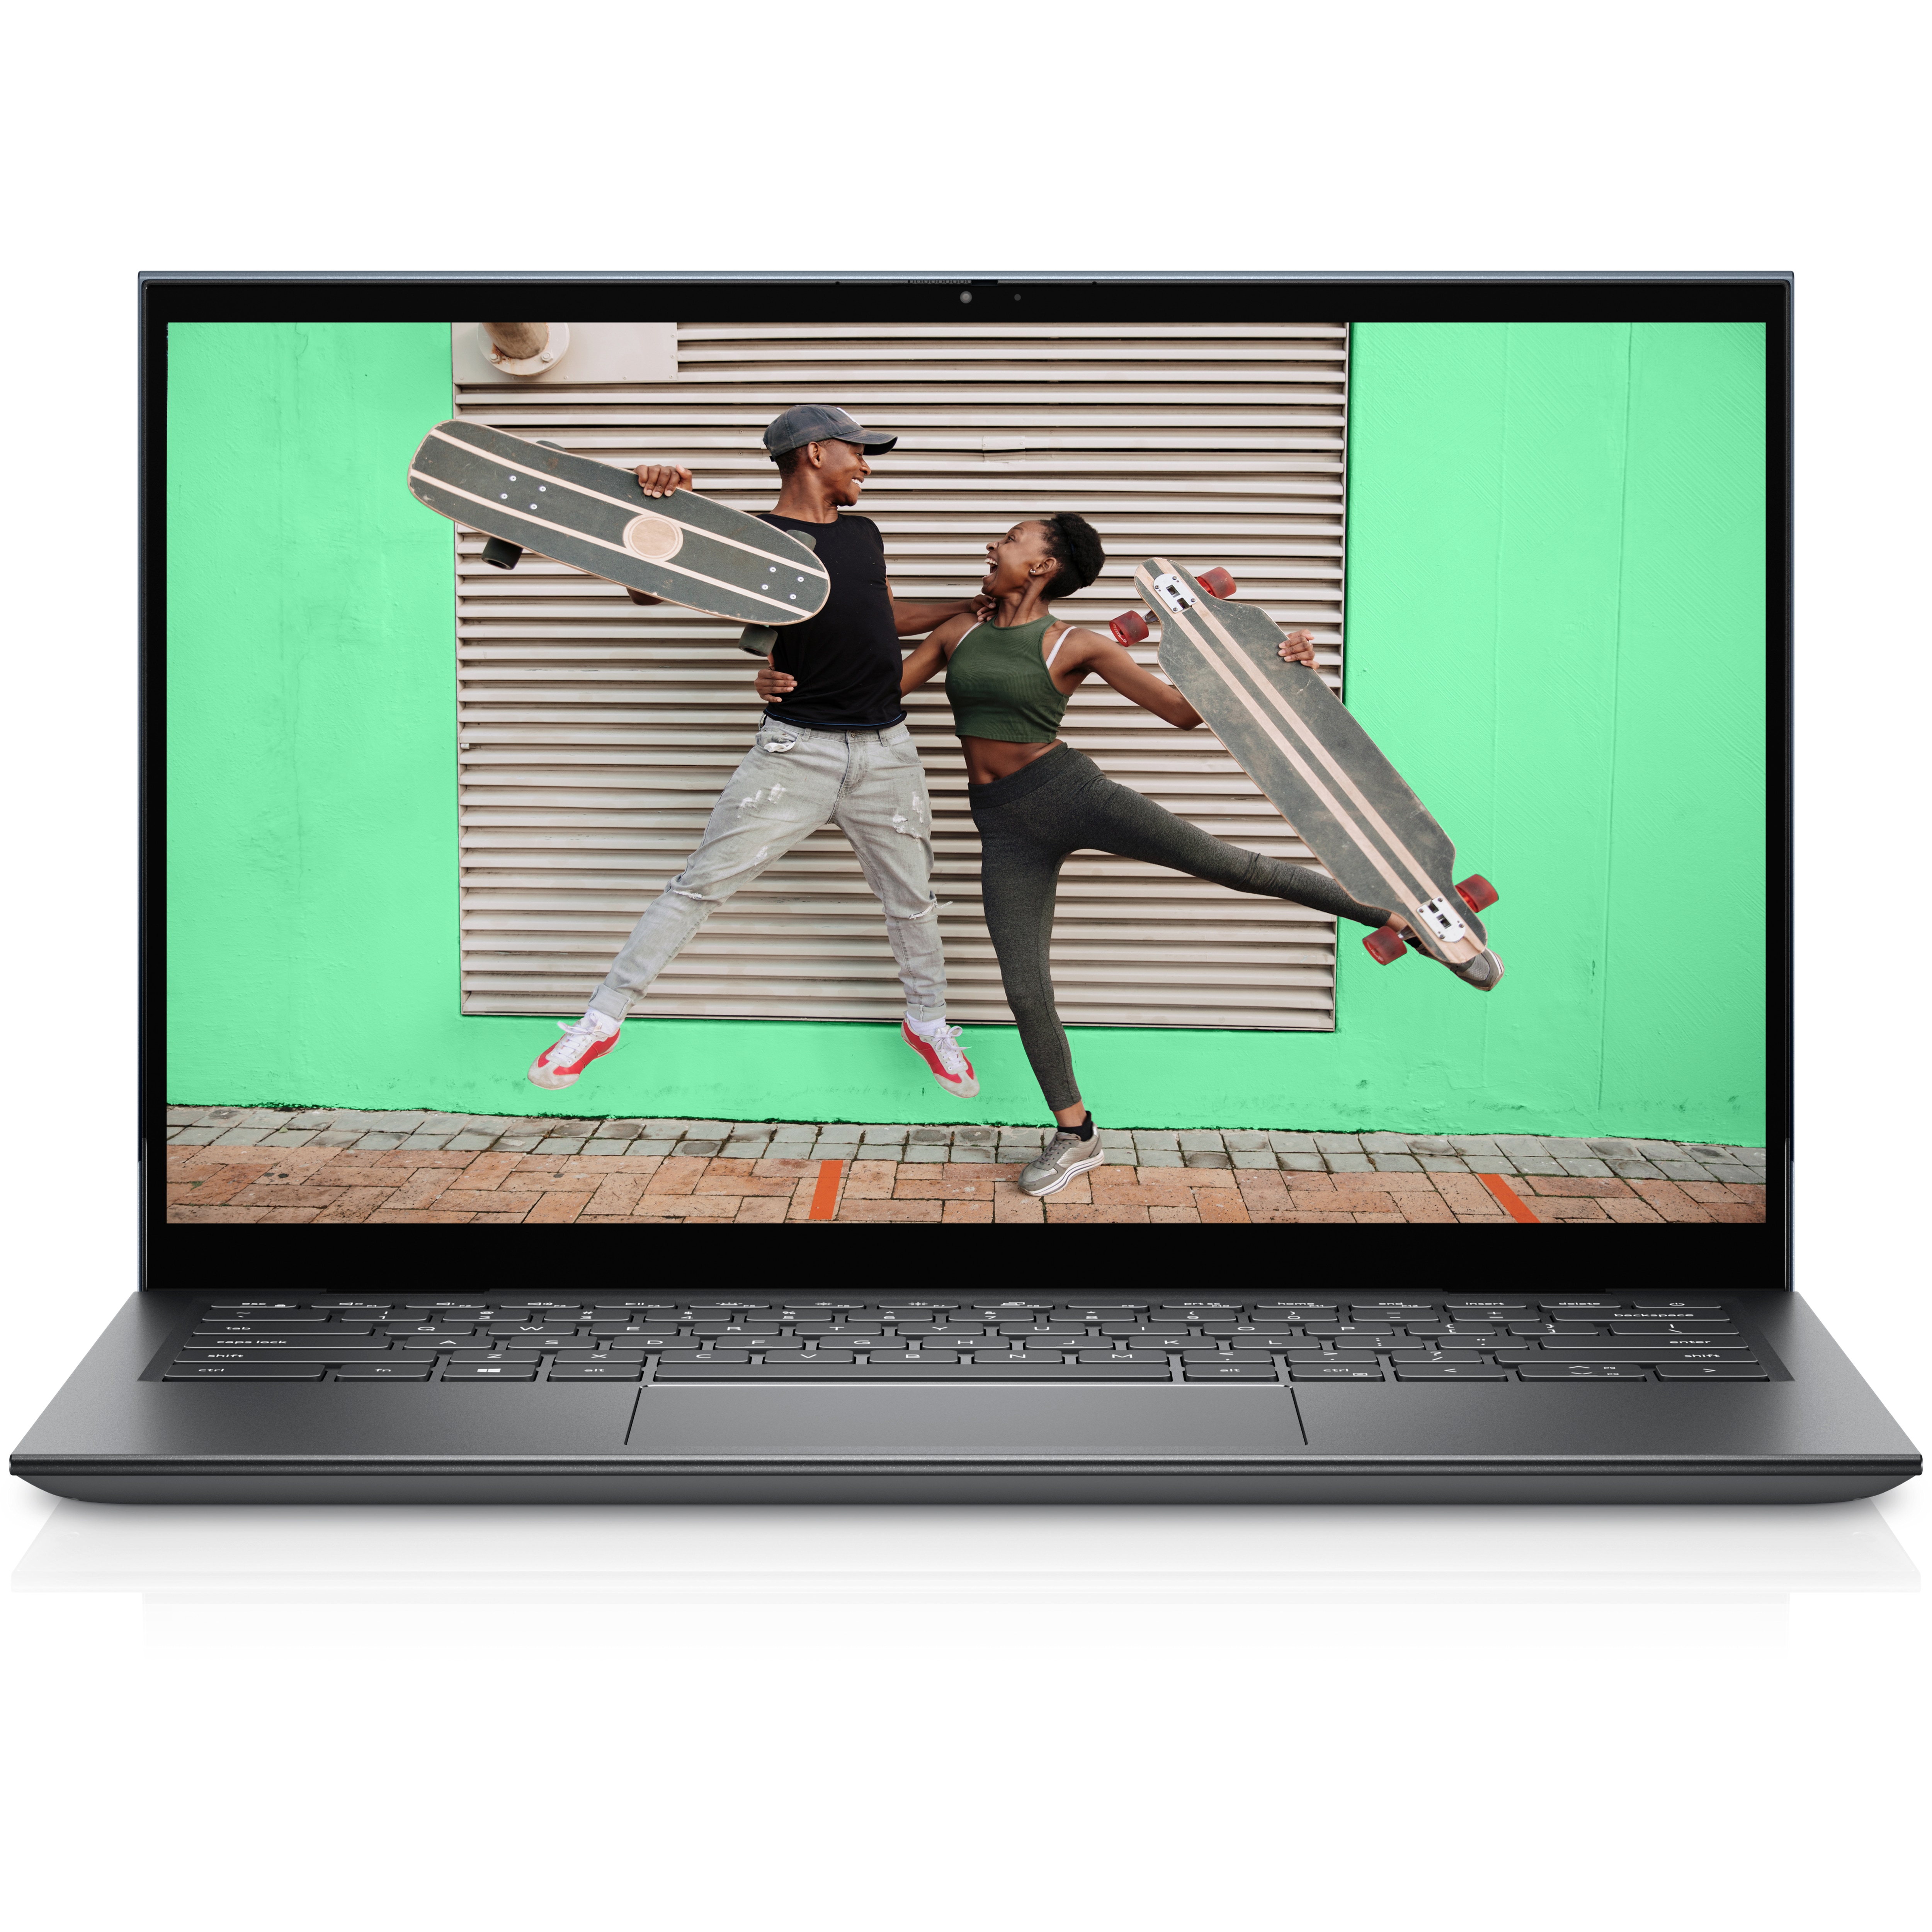 Dell Inspiron 14 7415 2-in-1 Laptop with AMD Ryzen Processor 